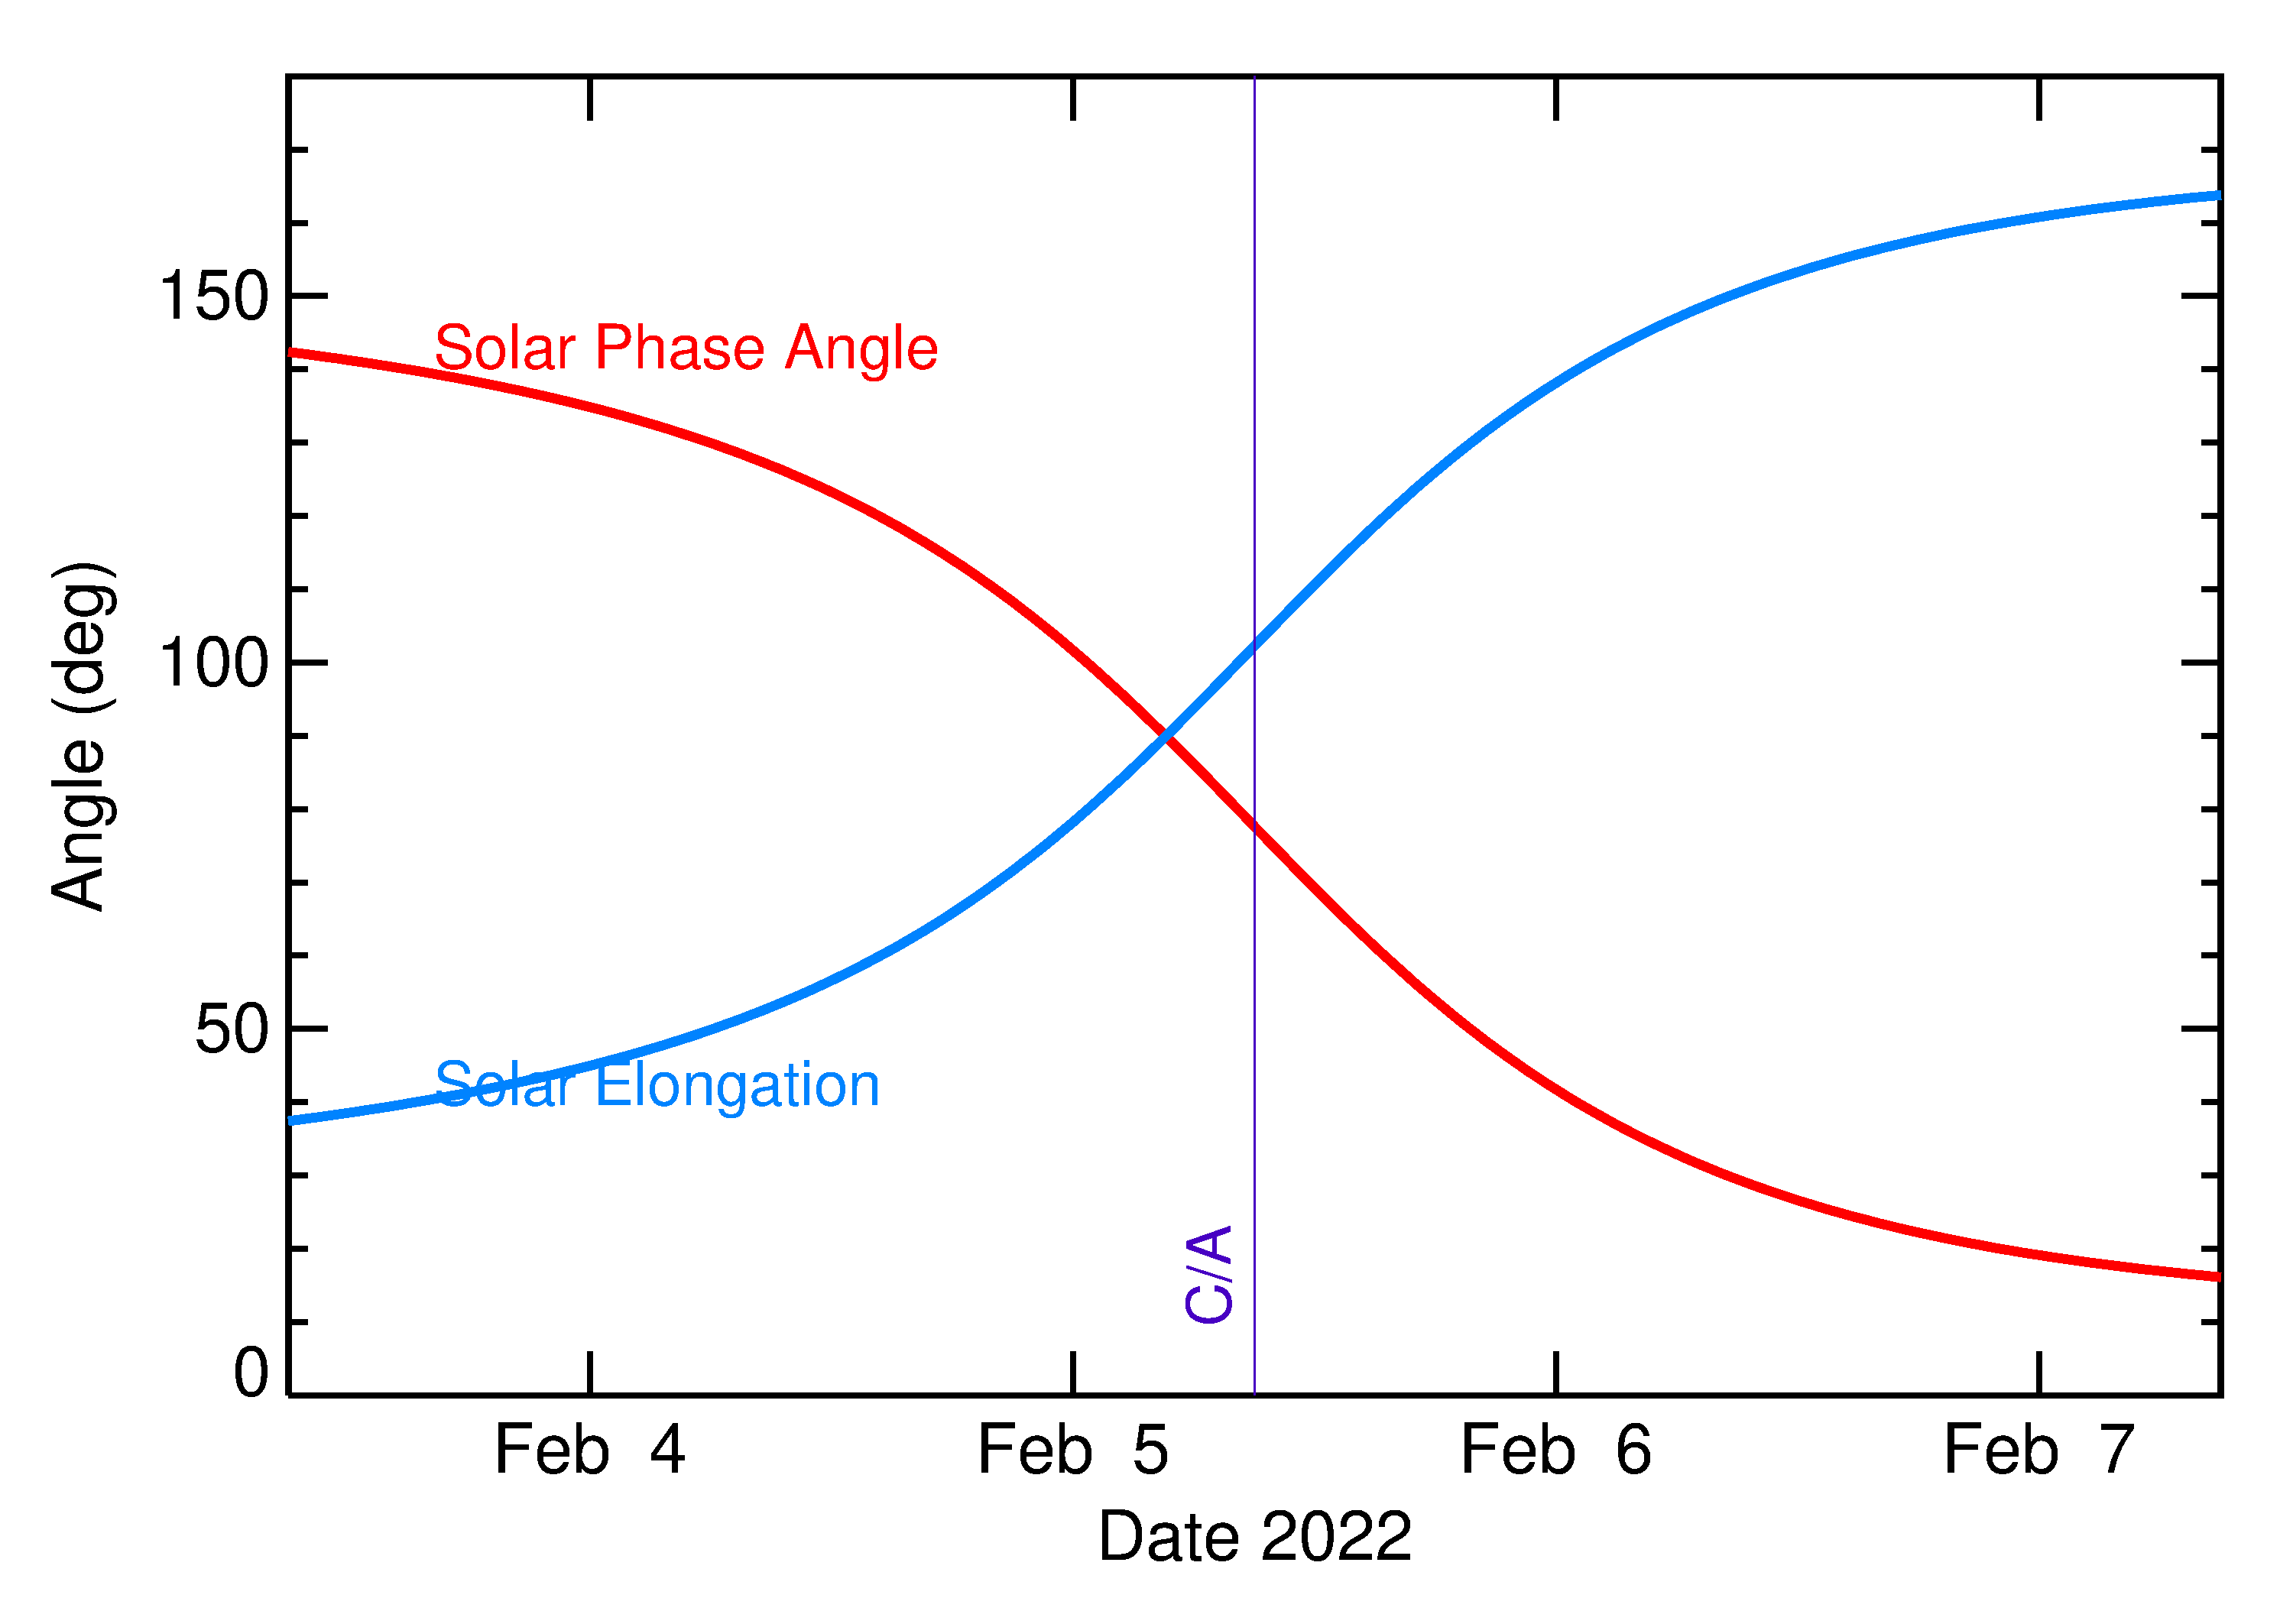 Solar Elongation and Solar Phase Angle of 2022 CU4 in the days around closest approach